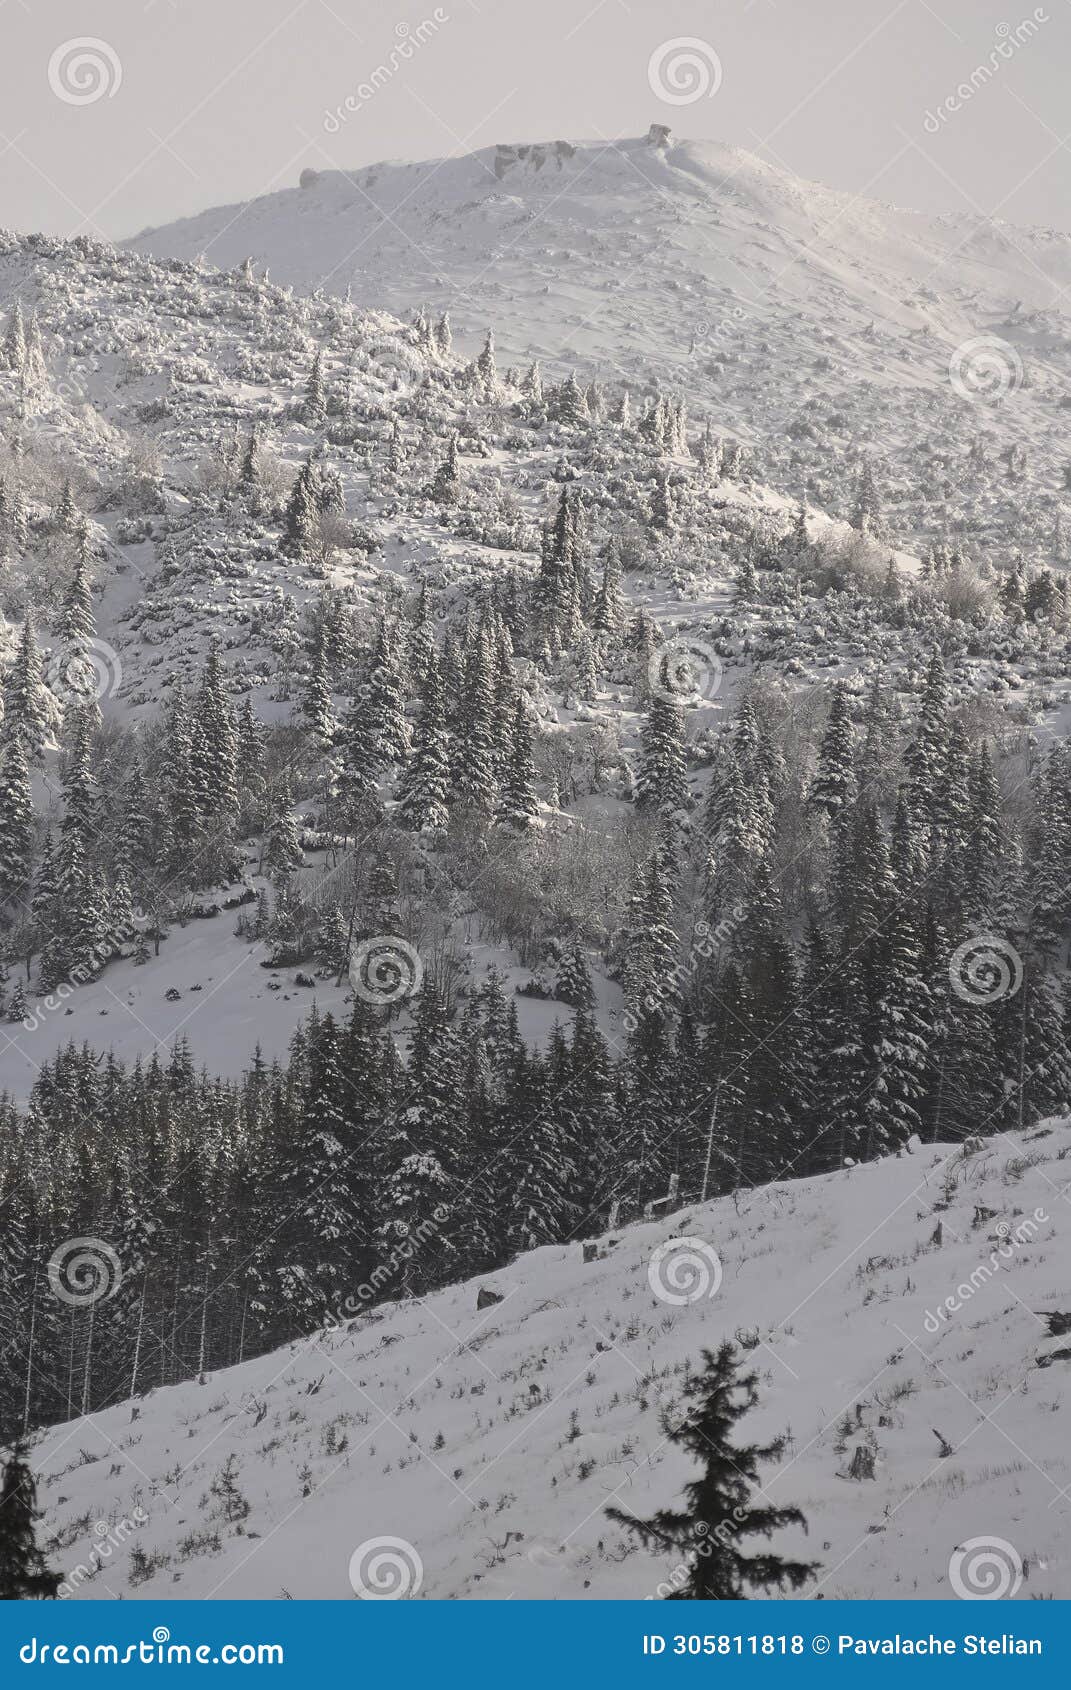 scenic view of carpathian mountains during the winter with cabins or various human settlements